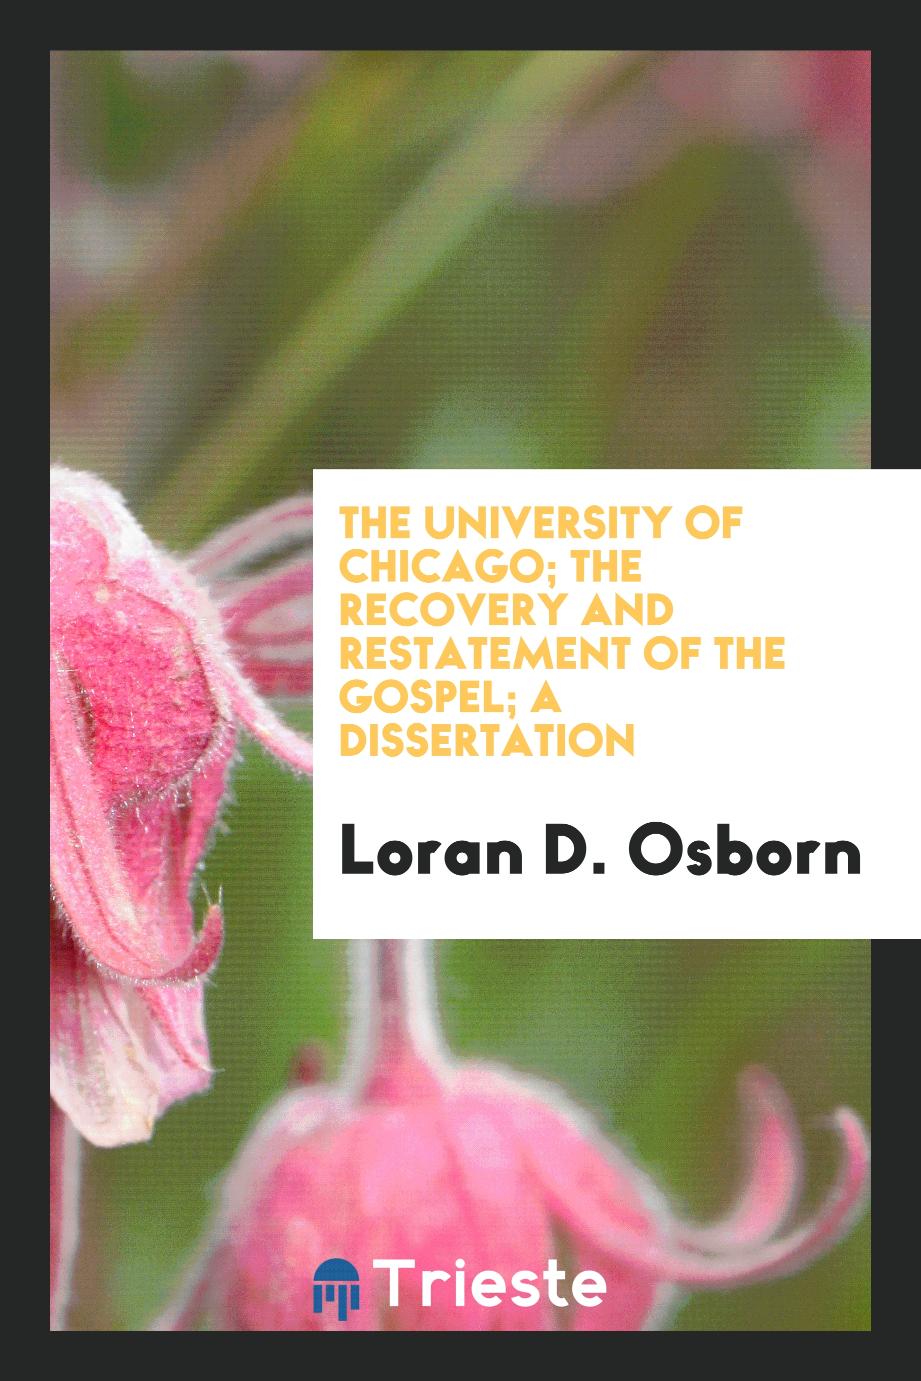 The University of Chicago; The recovery and restatement of the gospel; A Dissertation